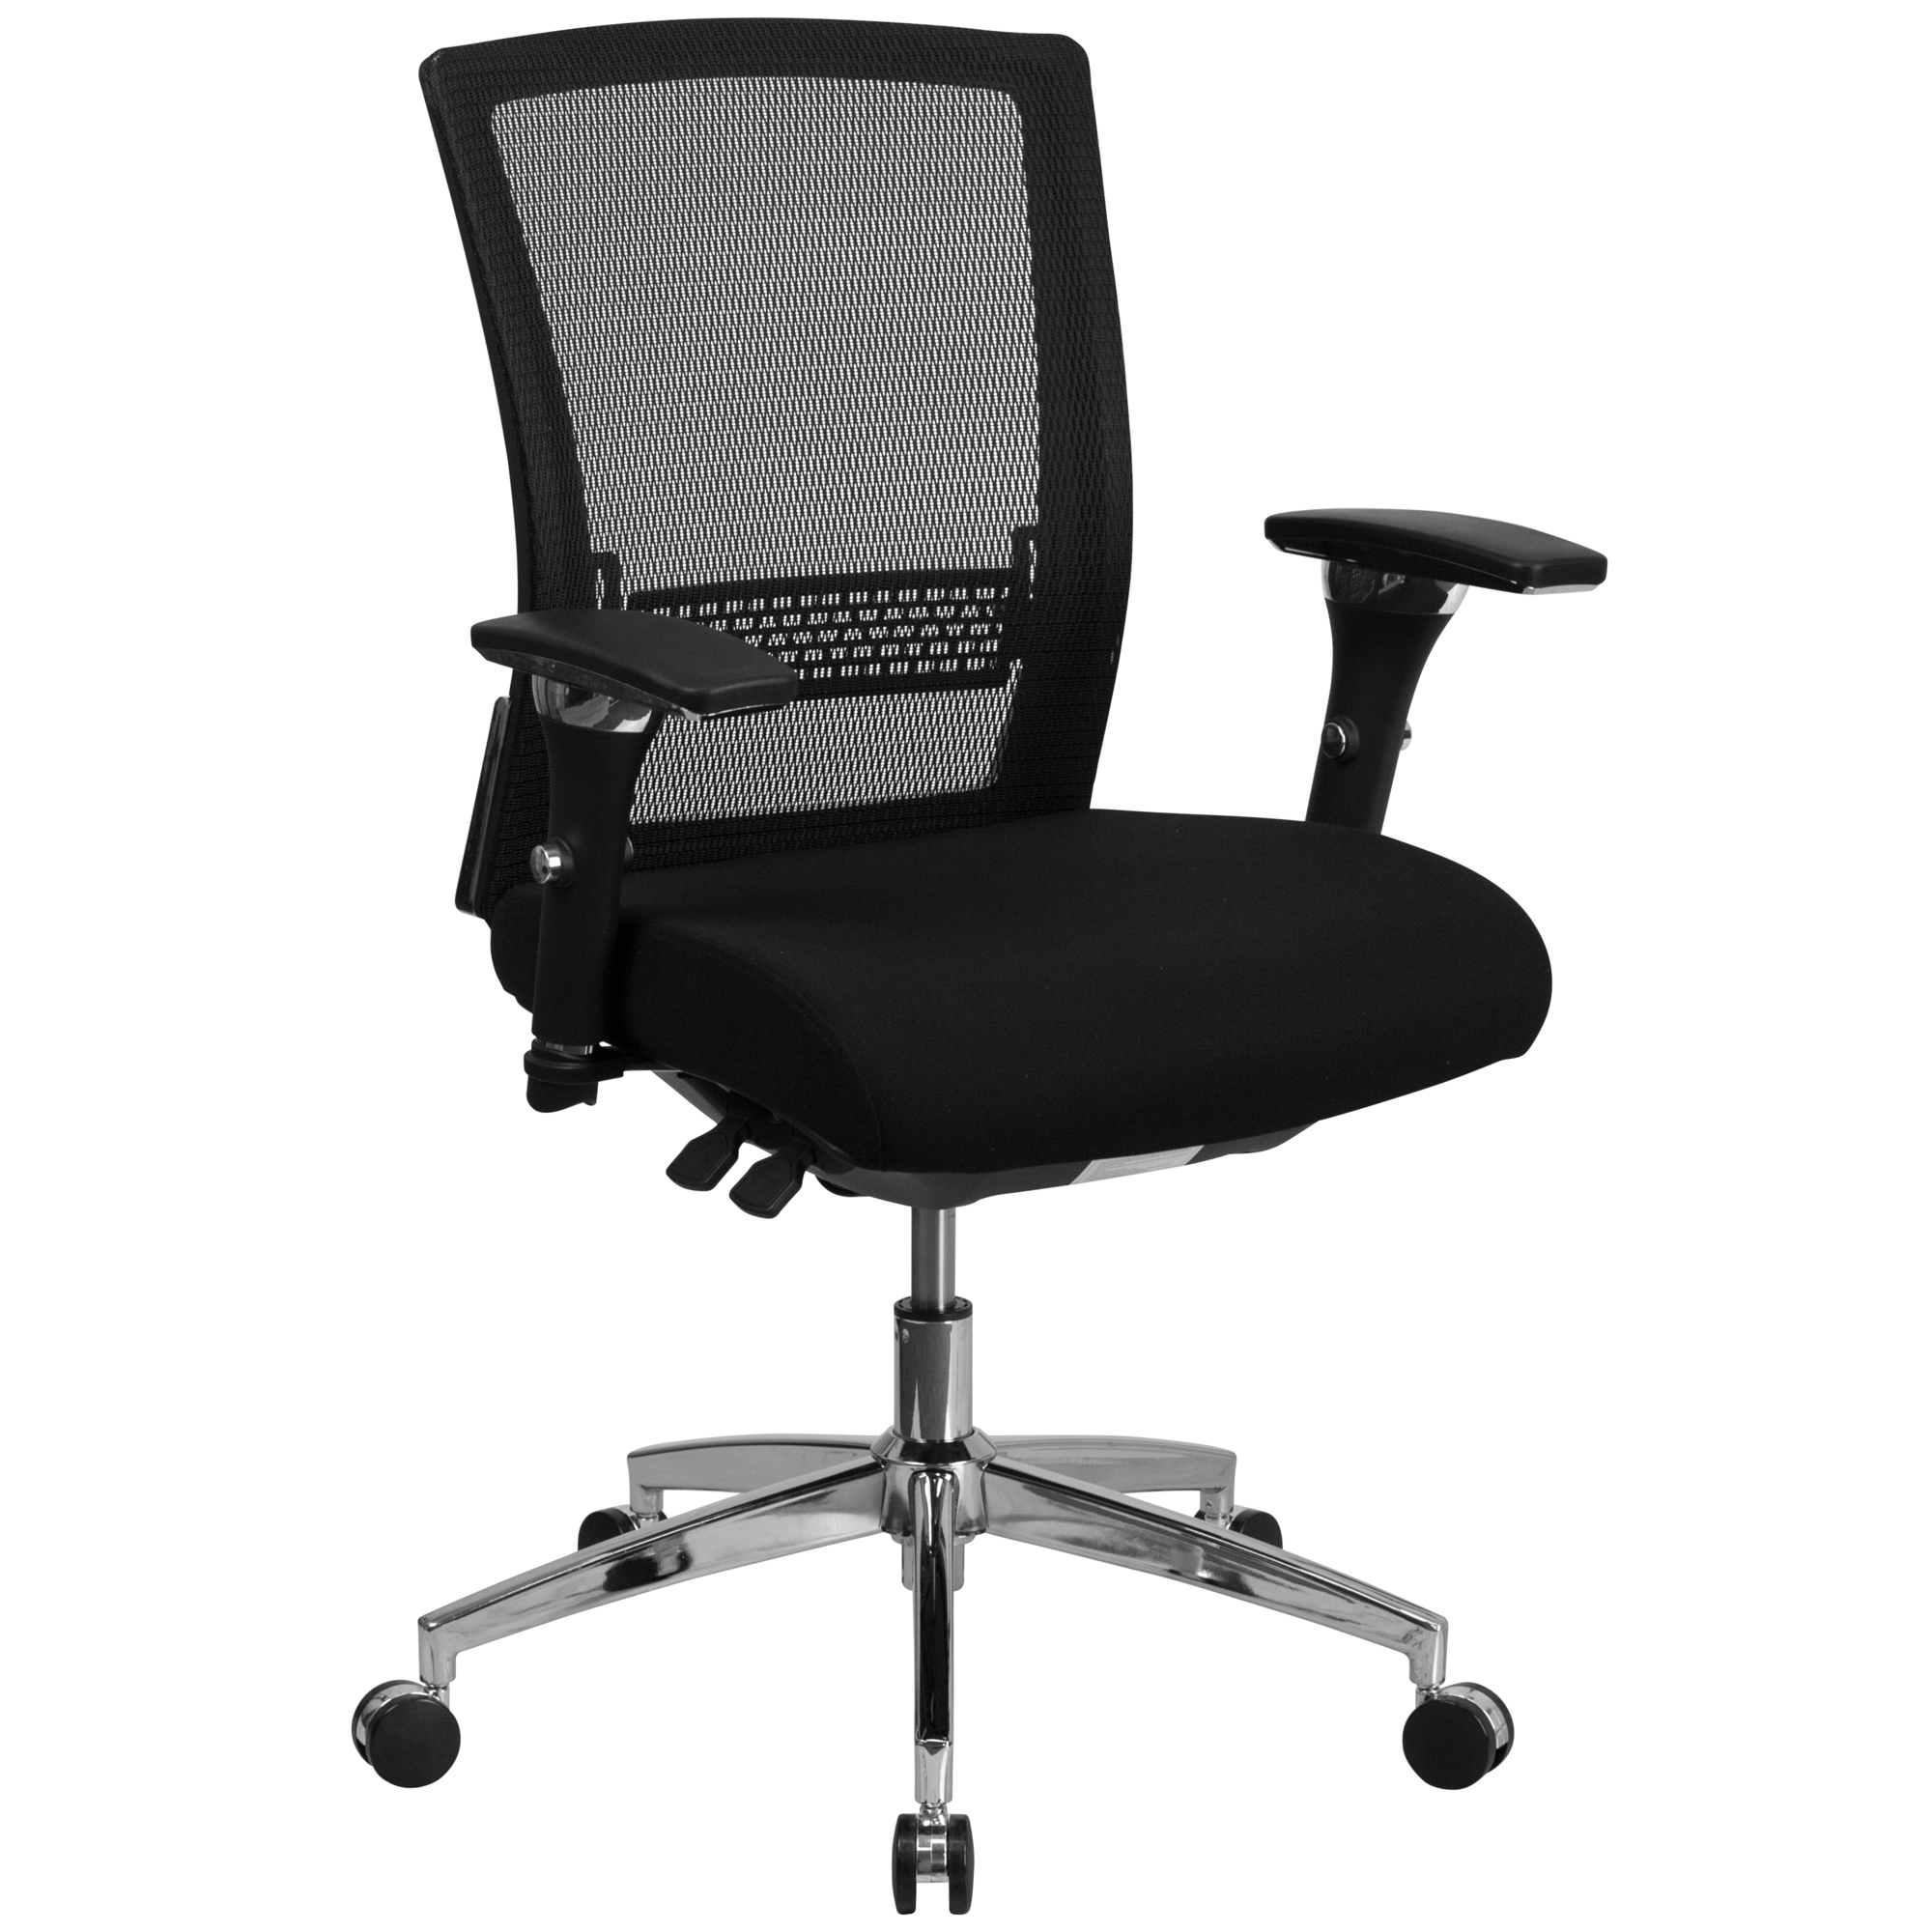 24/7 300 lb. Rated Mid-Back Black Mesh Chair, Primary Color Black, Included (qty.) 1, Model - Flash Furniture GOWY858